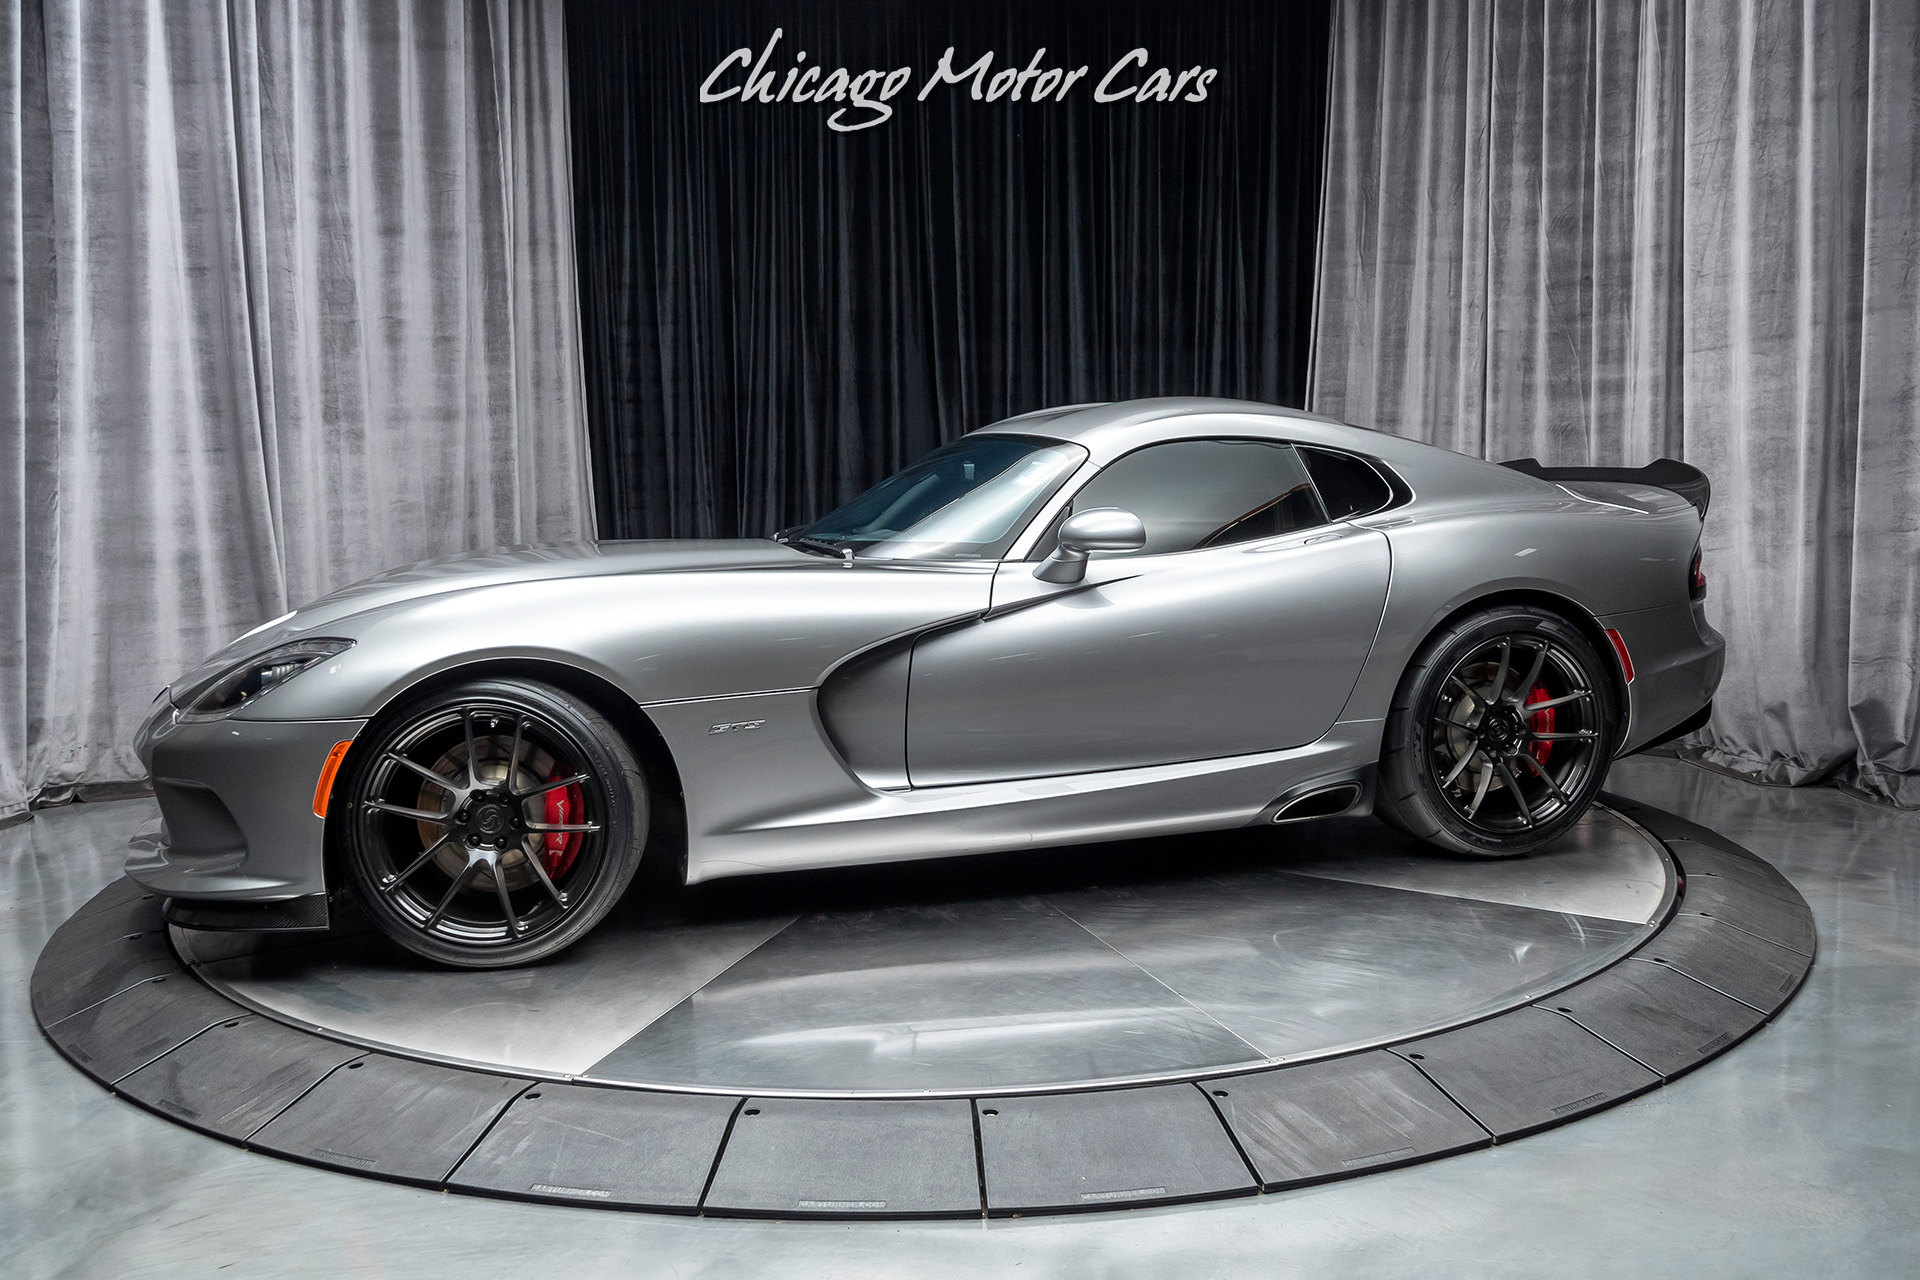 Used 2014 Dodge SRT Viper GTS Advance Aerodynamics Package! SRT  High-Performance Audio! For Sale (Special Pricing) | Chicago Motor Cars  Stock #17621A